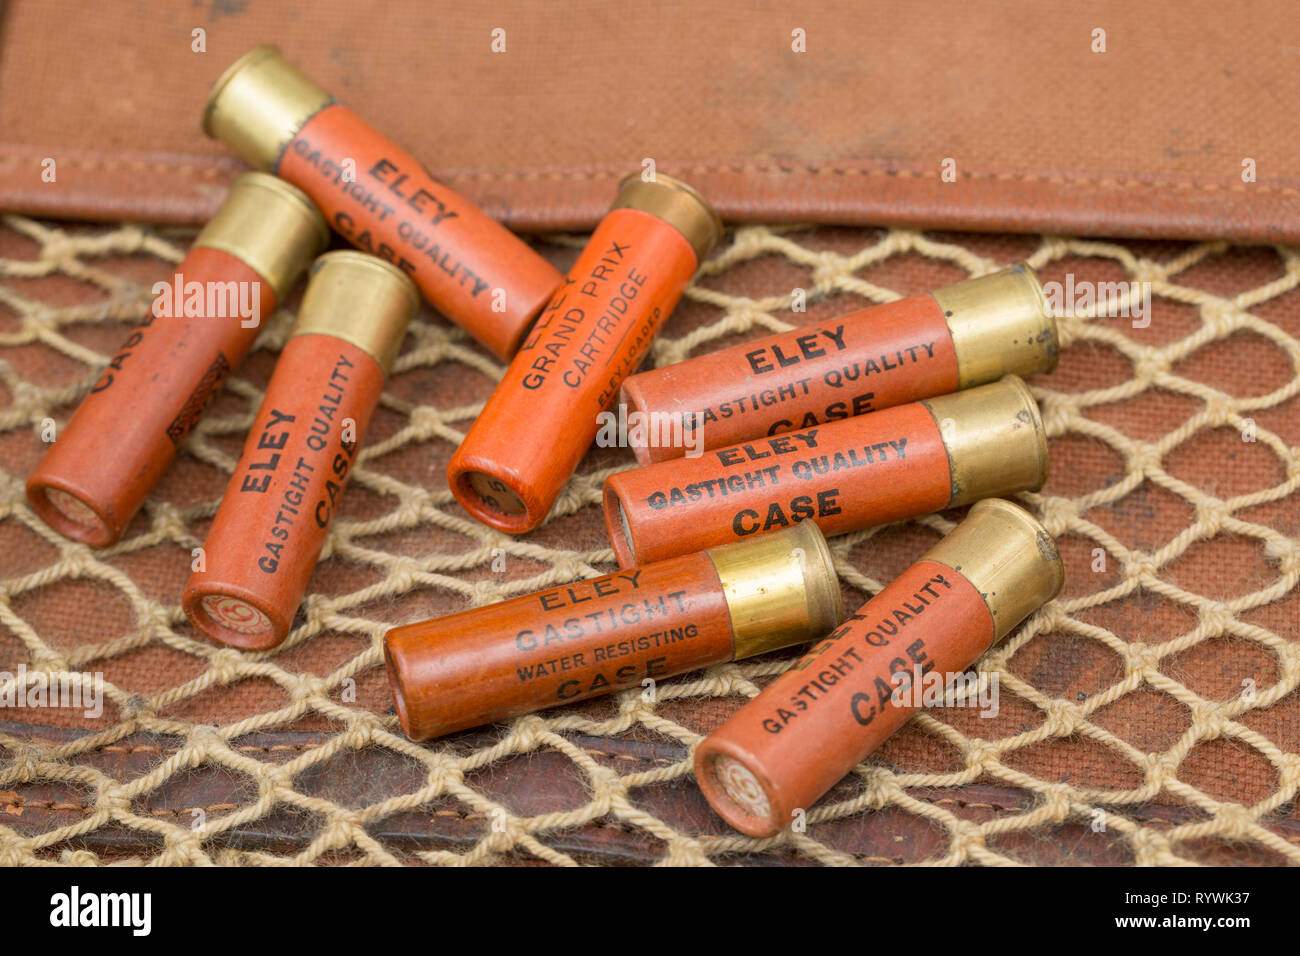 Old Eley paper cased 28-bore shotgun cartridges with rolled turnover closures loaded with leadshot. Collecting shotgun cartridges is a hobby that can  Stock Photo